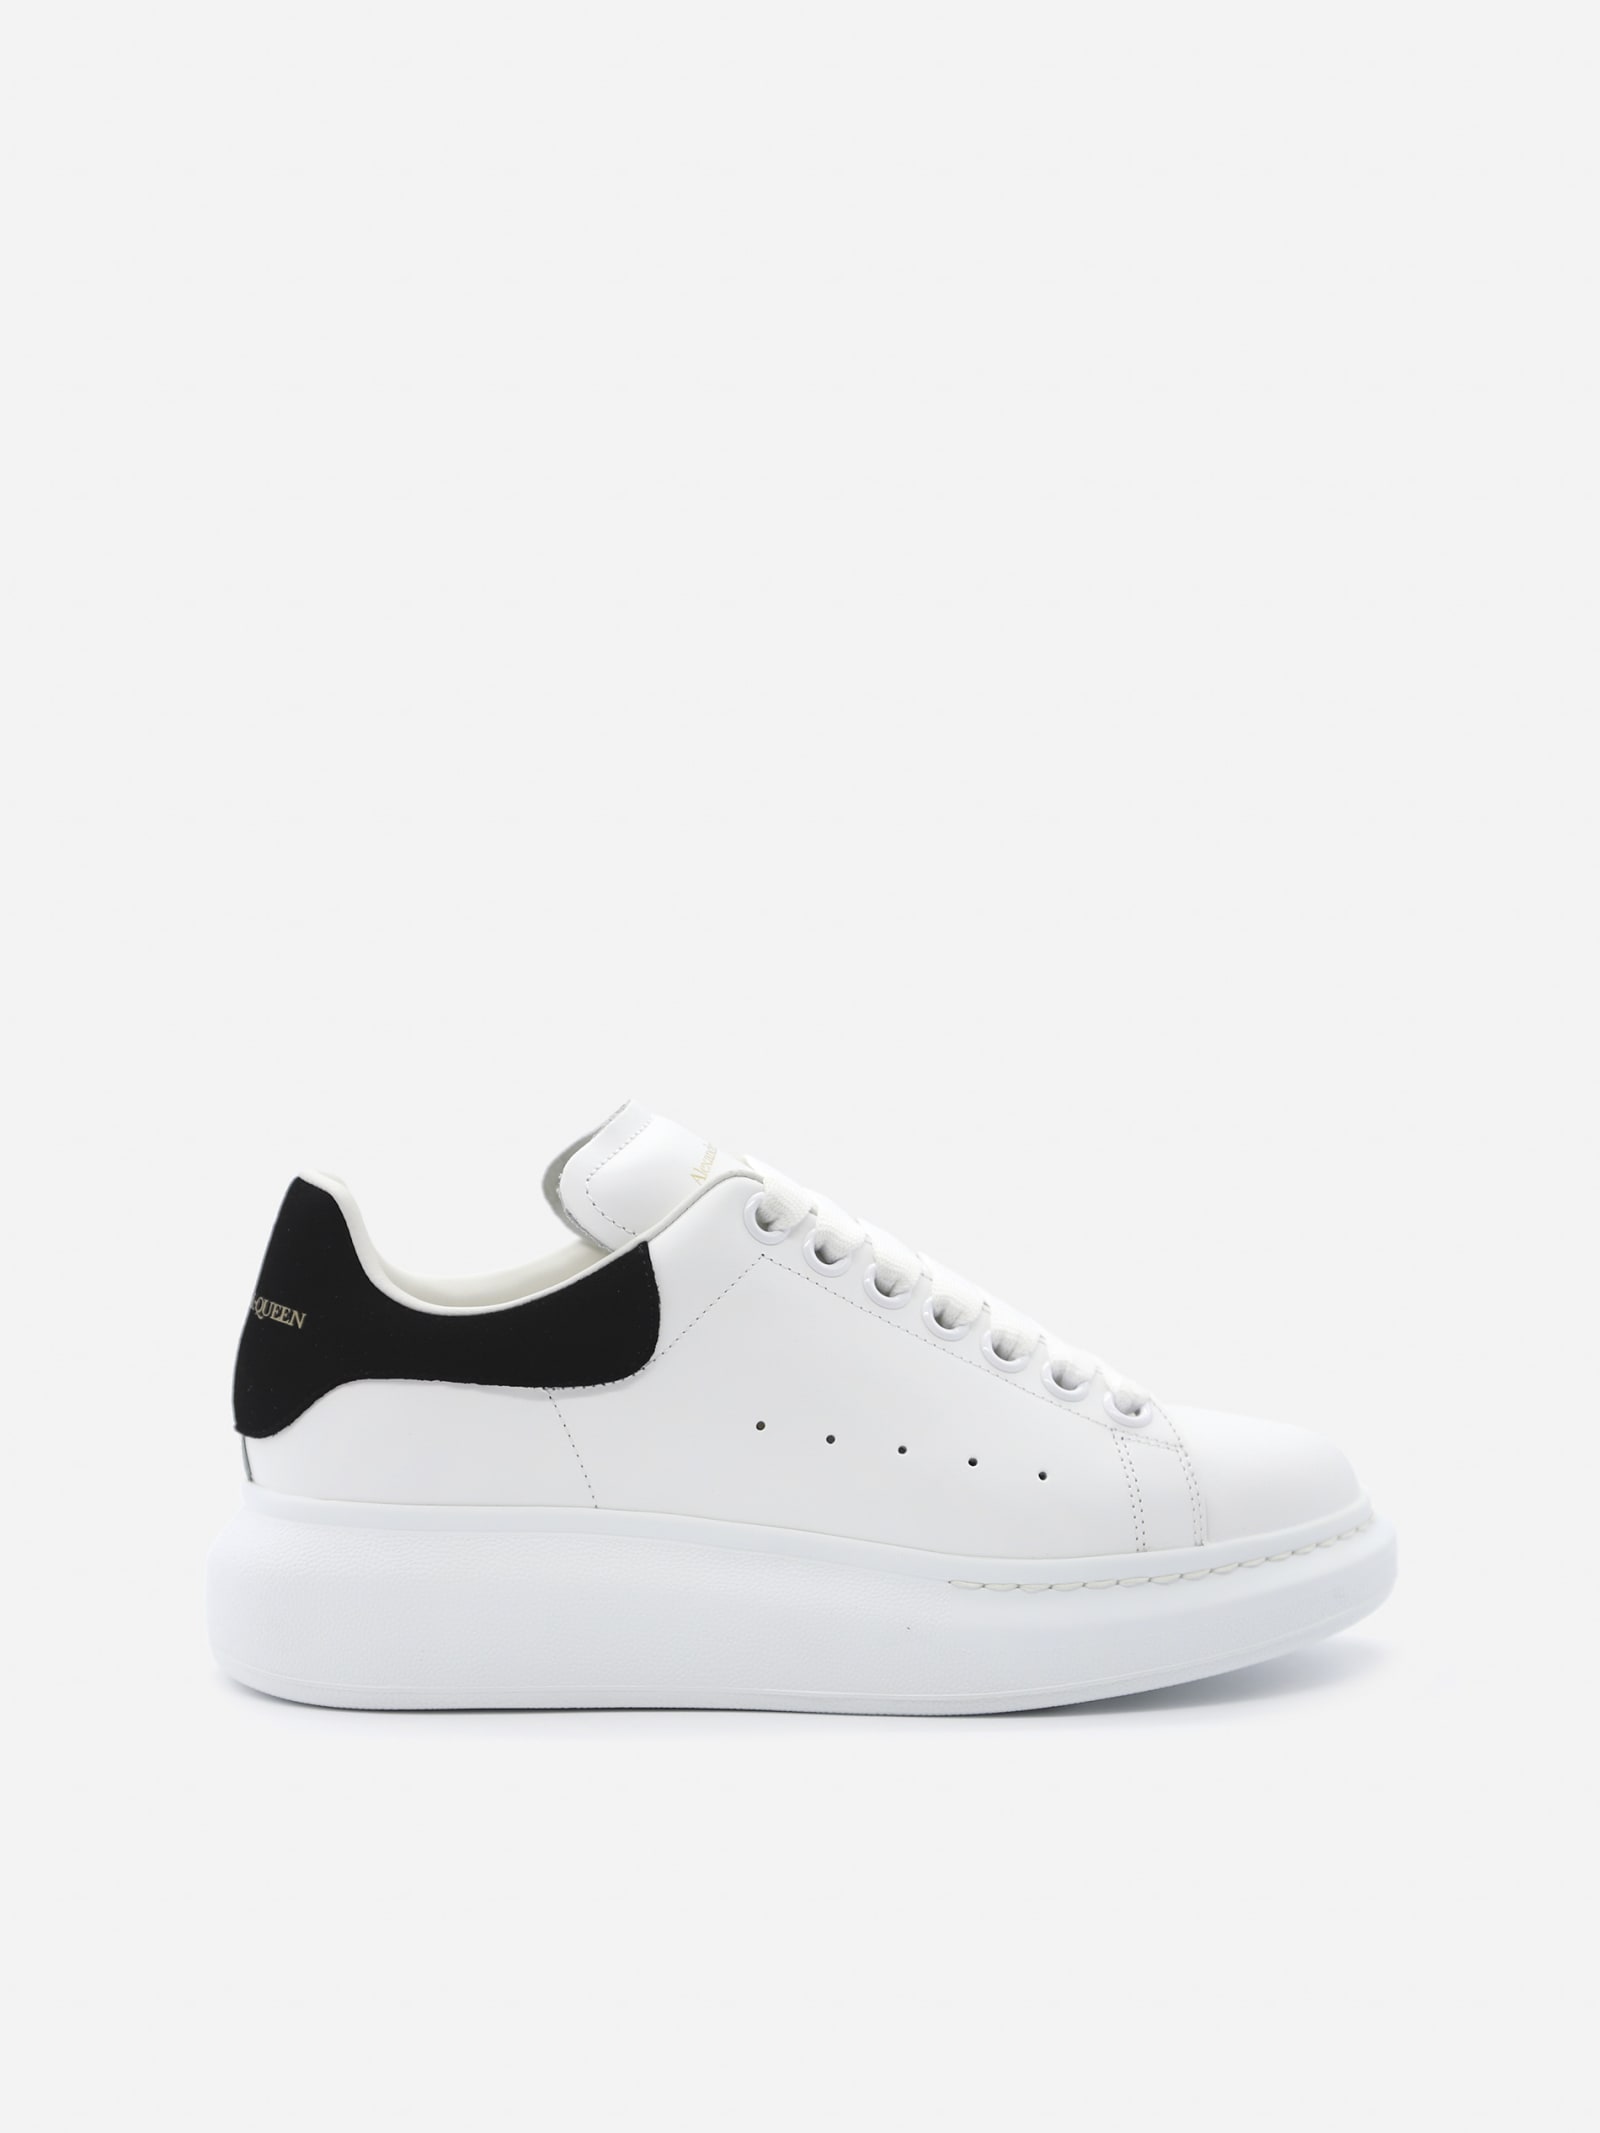 Oversized Sneakers In Leather With Contrasting Heel Tab